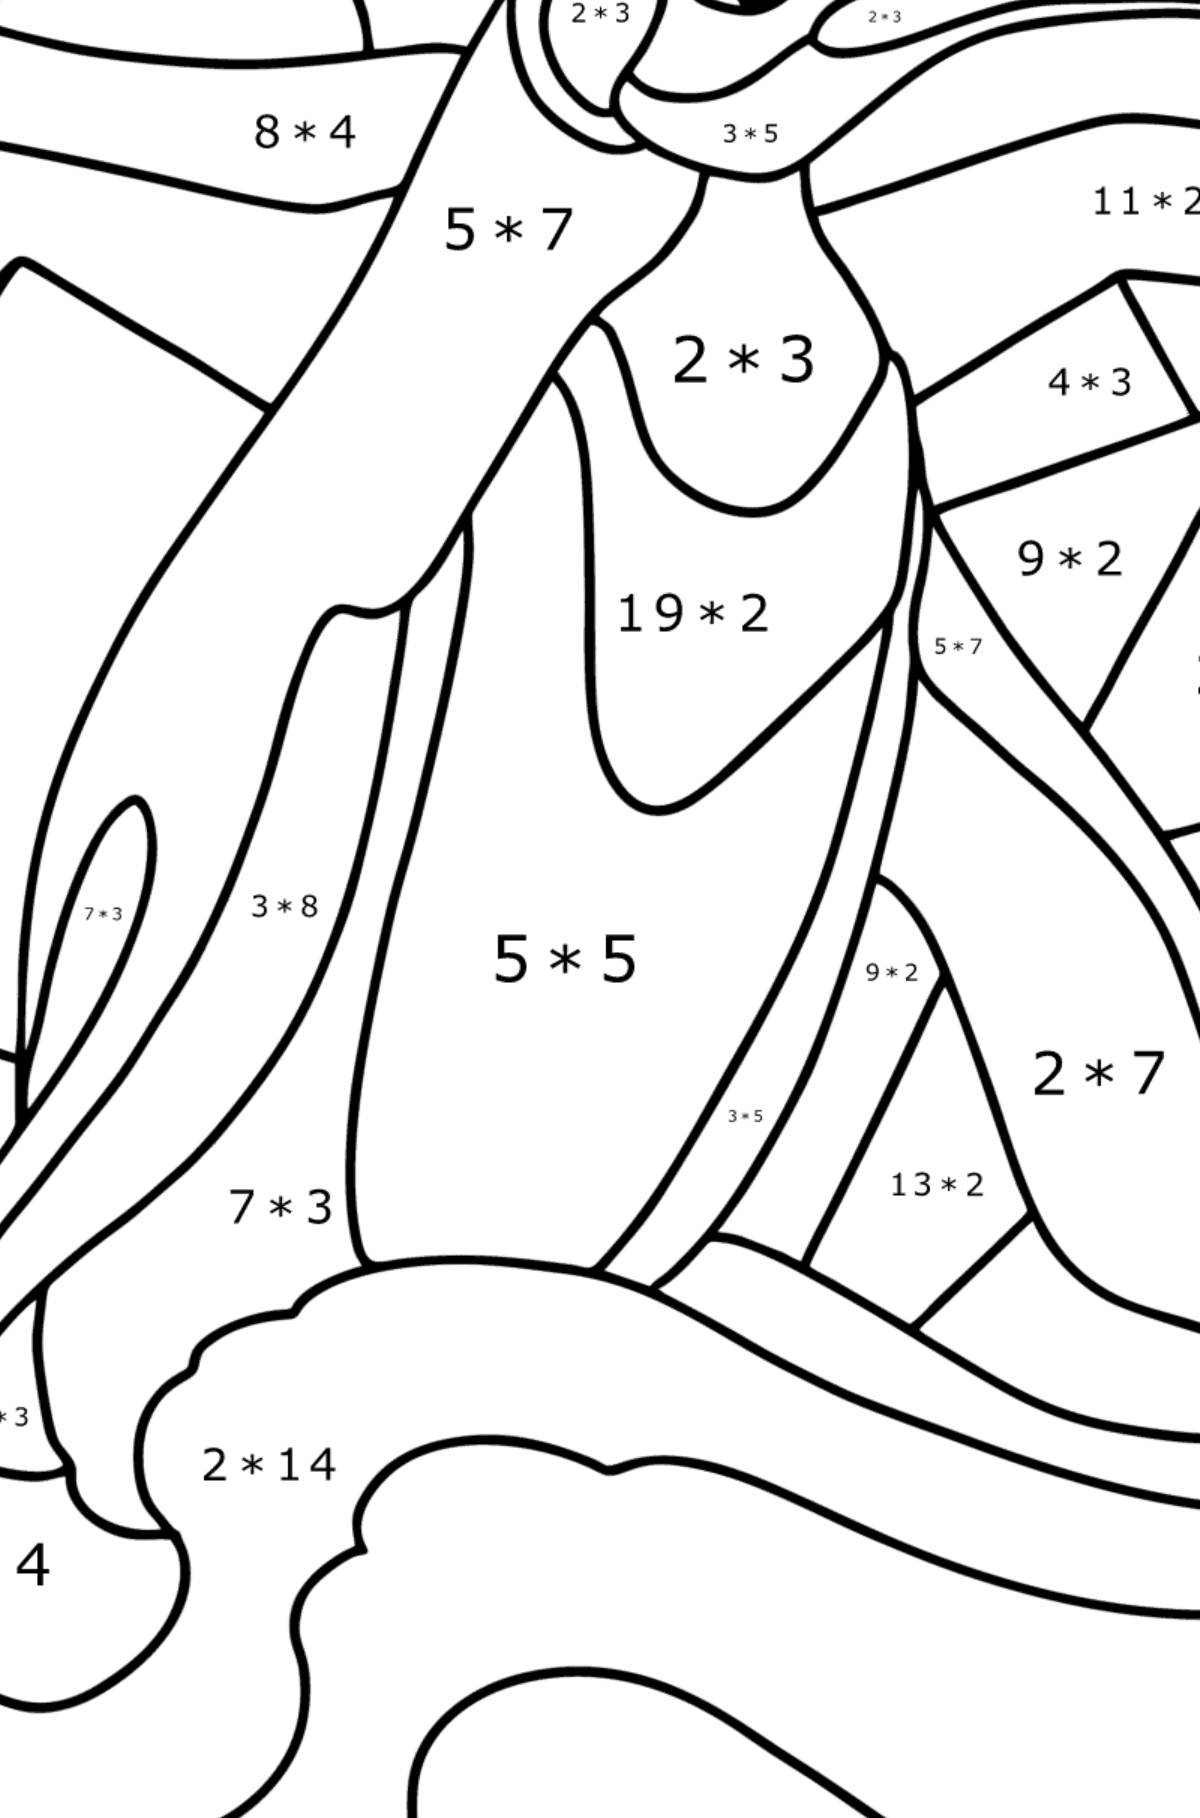 King penguin coloring page - Math Coloring - Multiplication for Kids